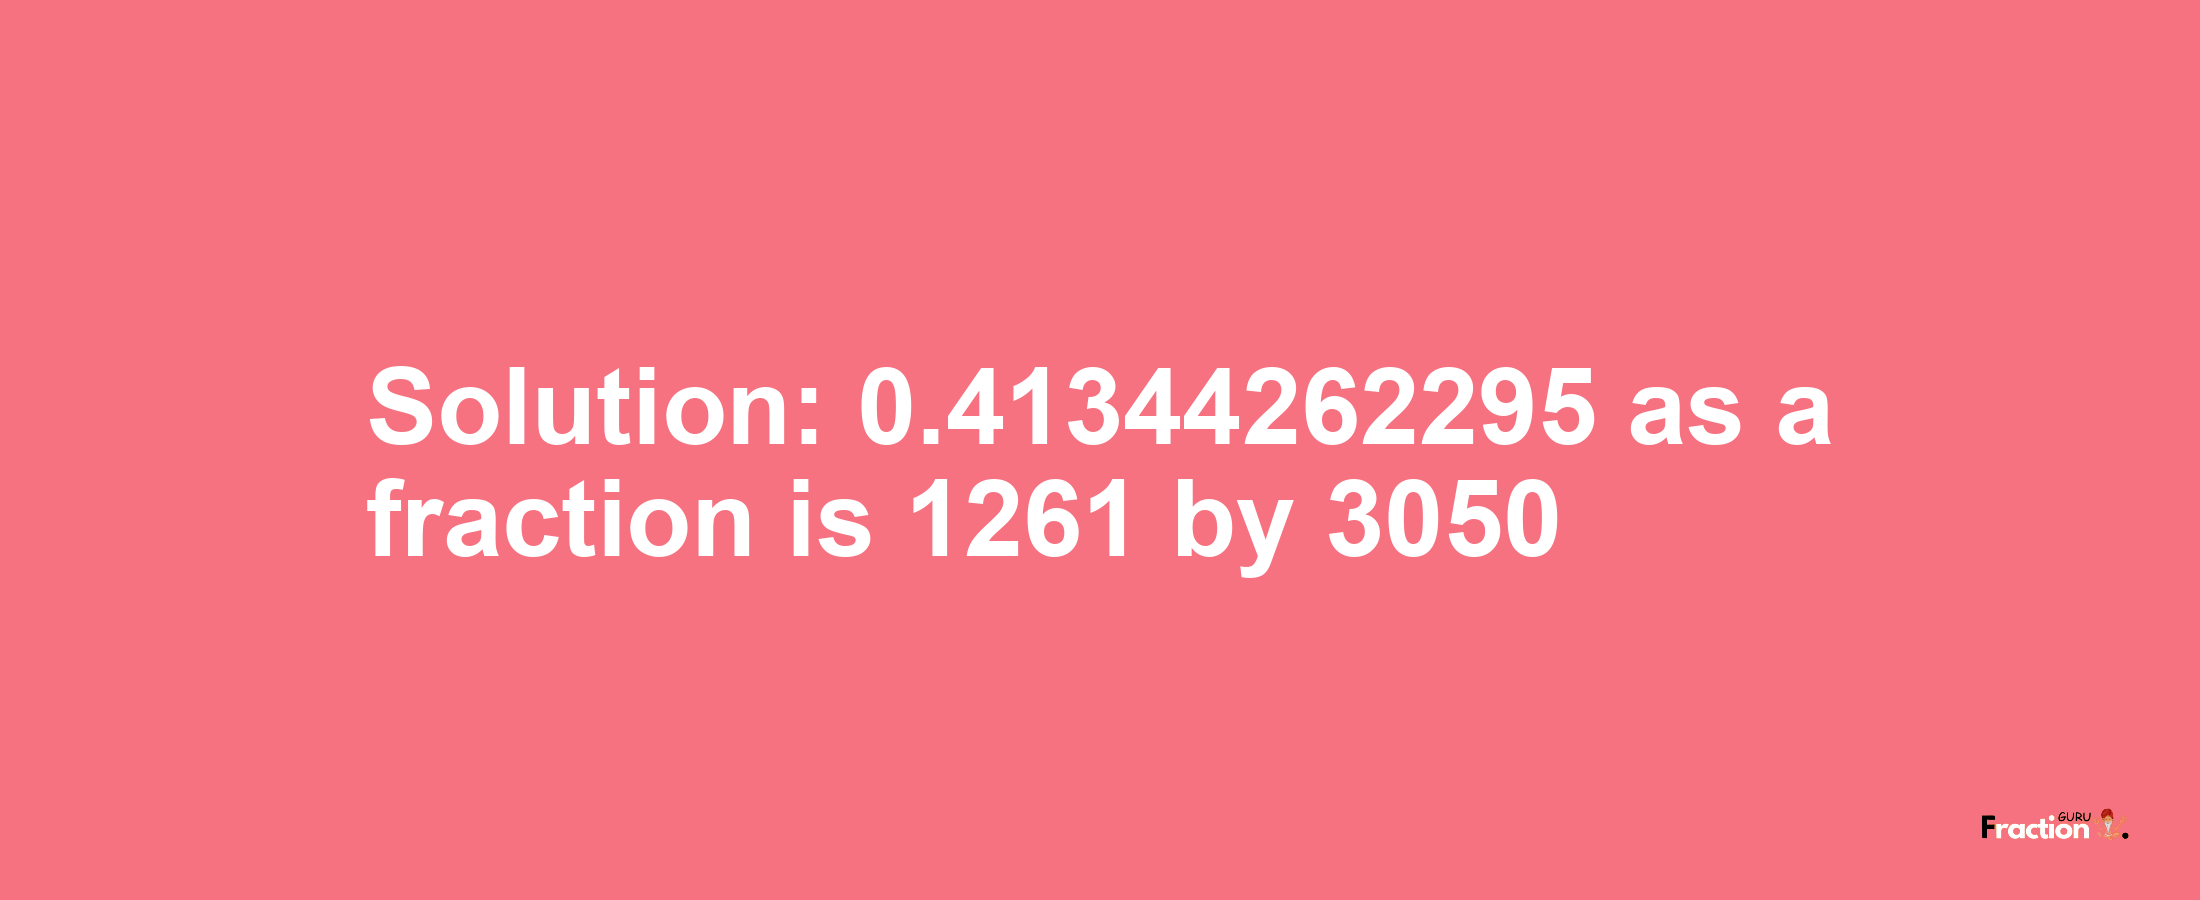 Solution:0.41344262295 as a fraction is 1261/3050